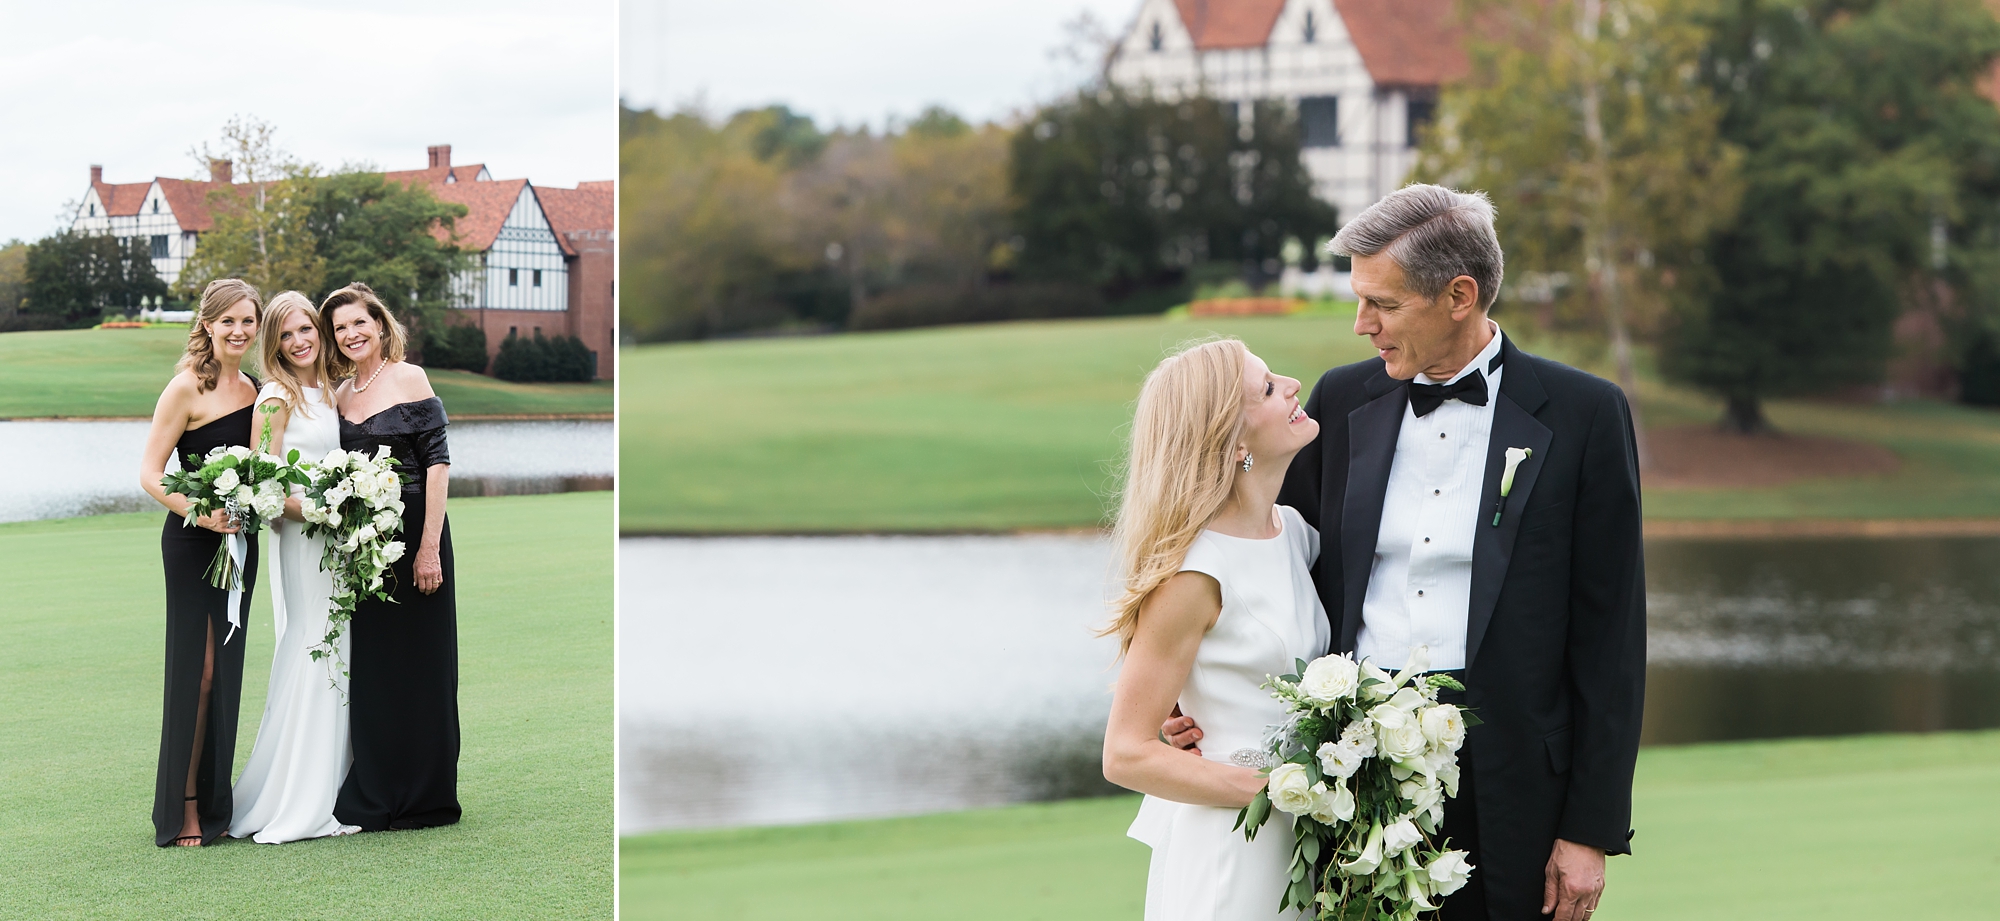 Black tie wedding at East Lake Golf Club Top Wedding Photographer Leigh Wolfe Photography